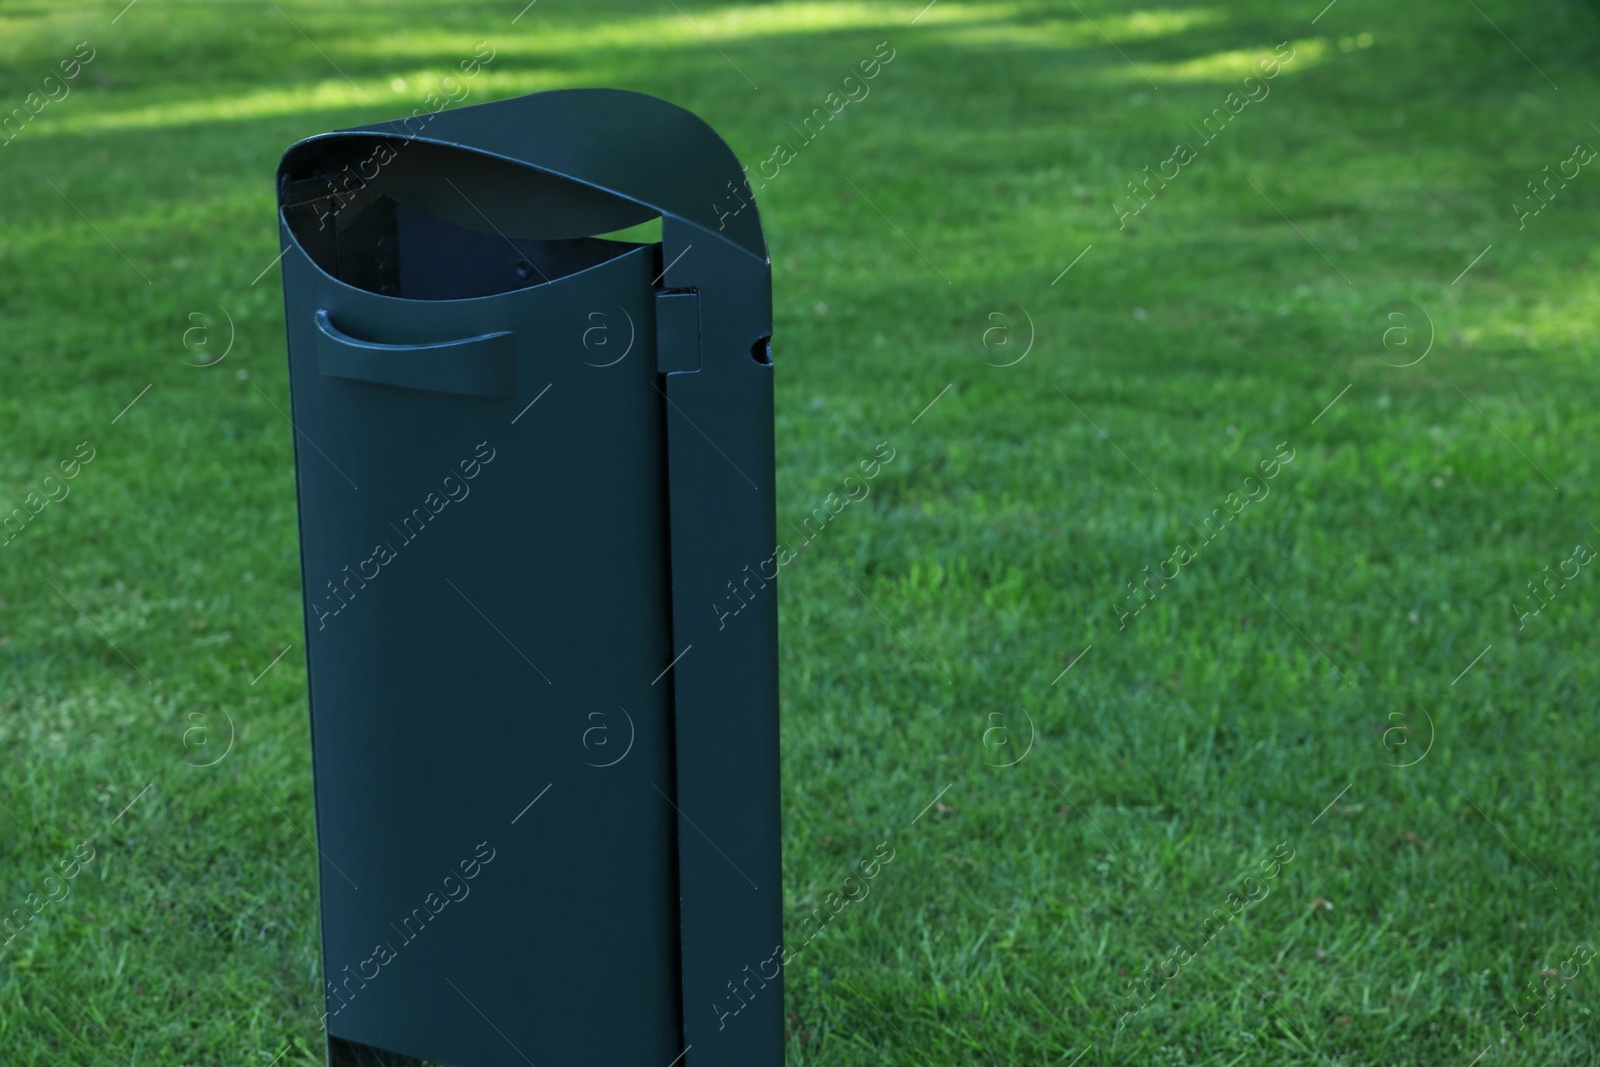 Photo of Trash bin on green grass outdoors. Space for text